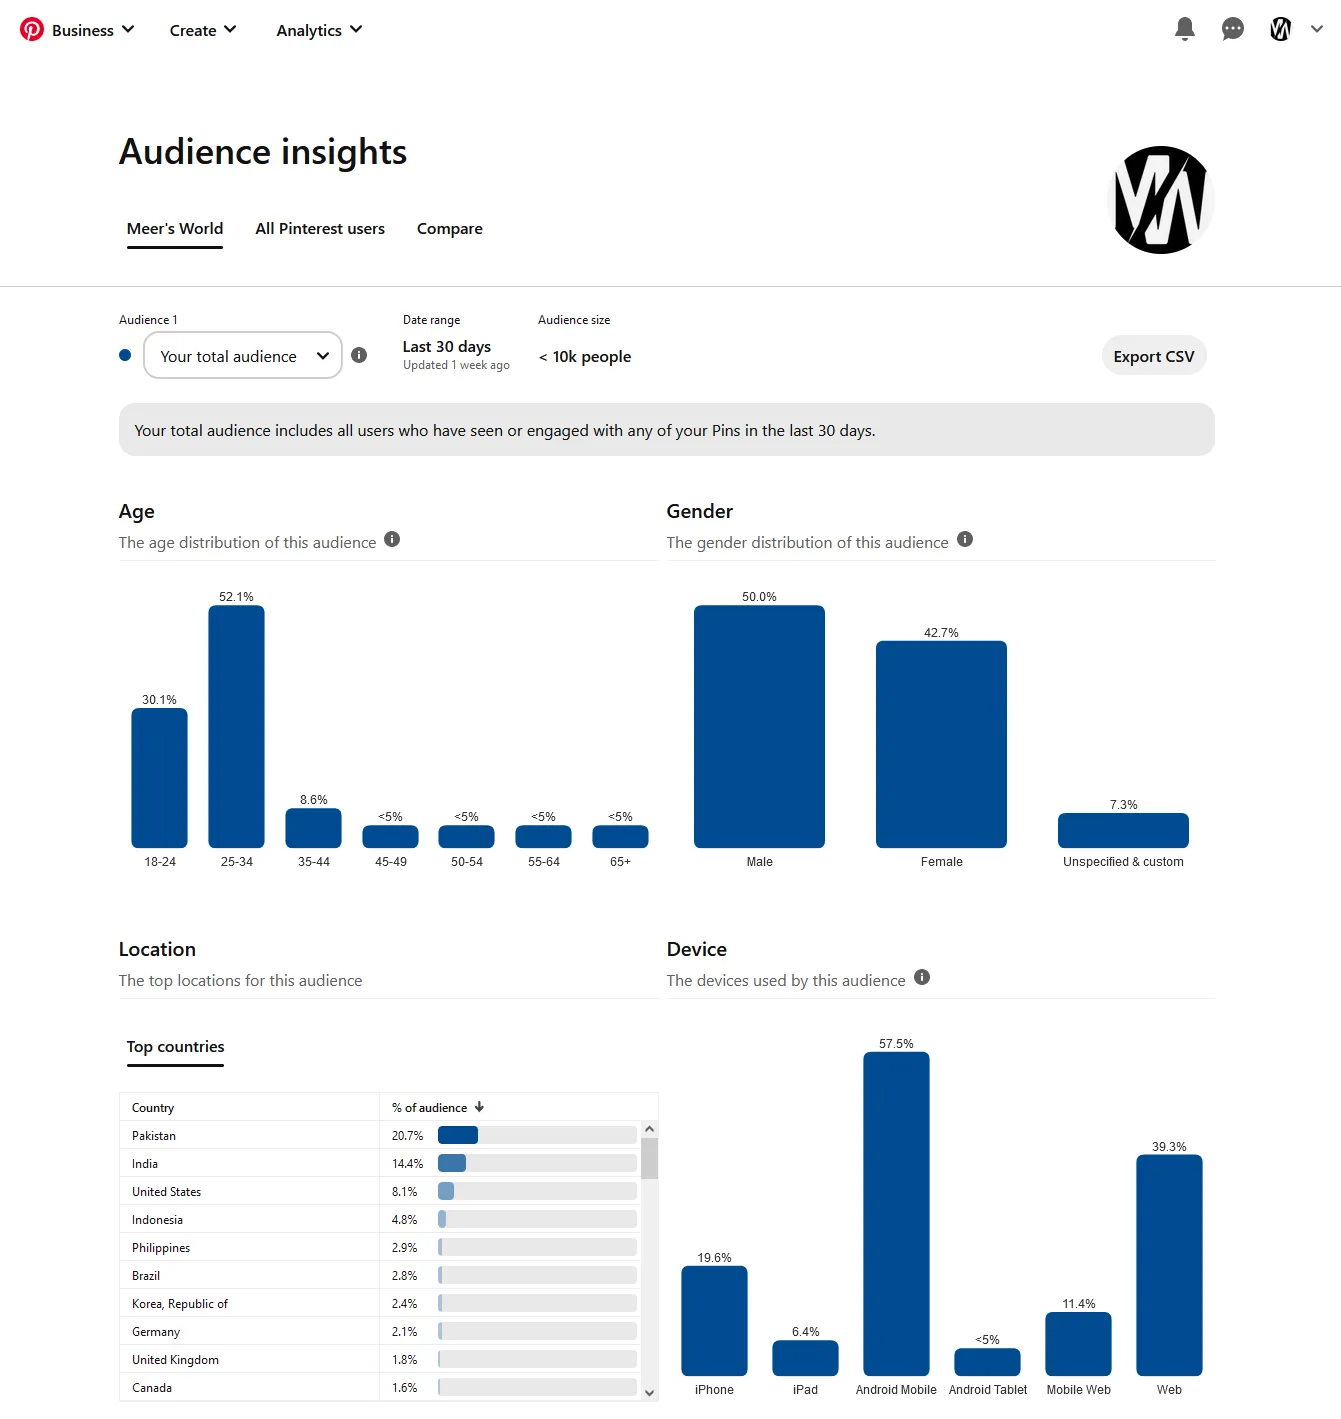 On Audience Insights you can view the detail insights about your Pinterest audience like Age Distribution, Gender Distribution, Top Locations, Top Devices.